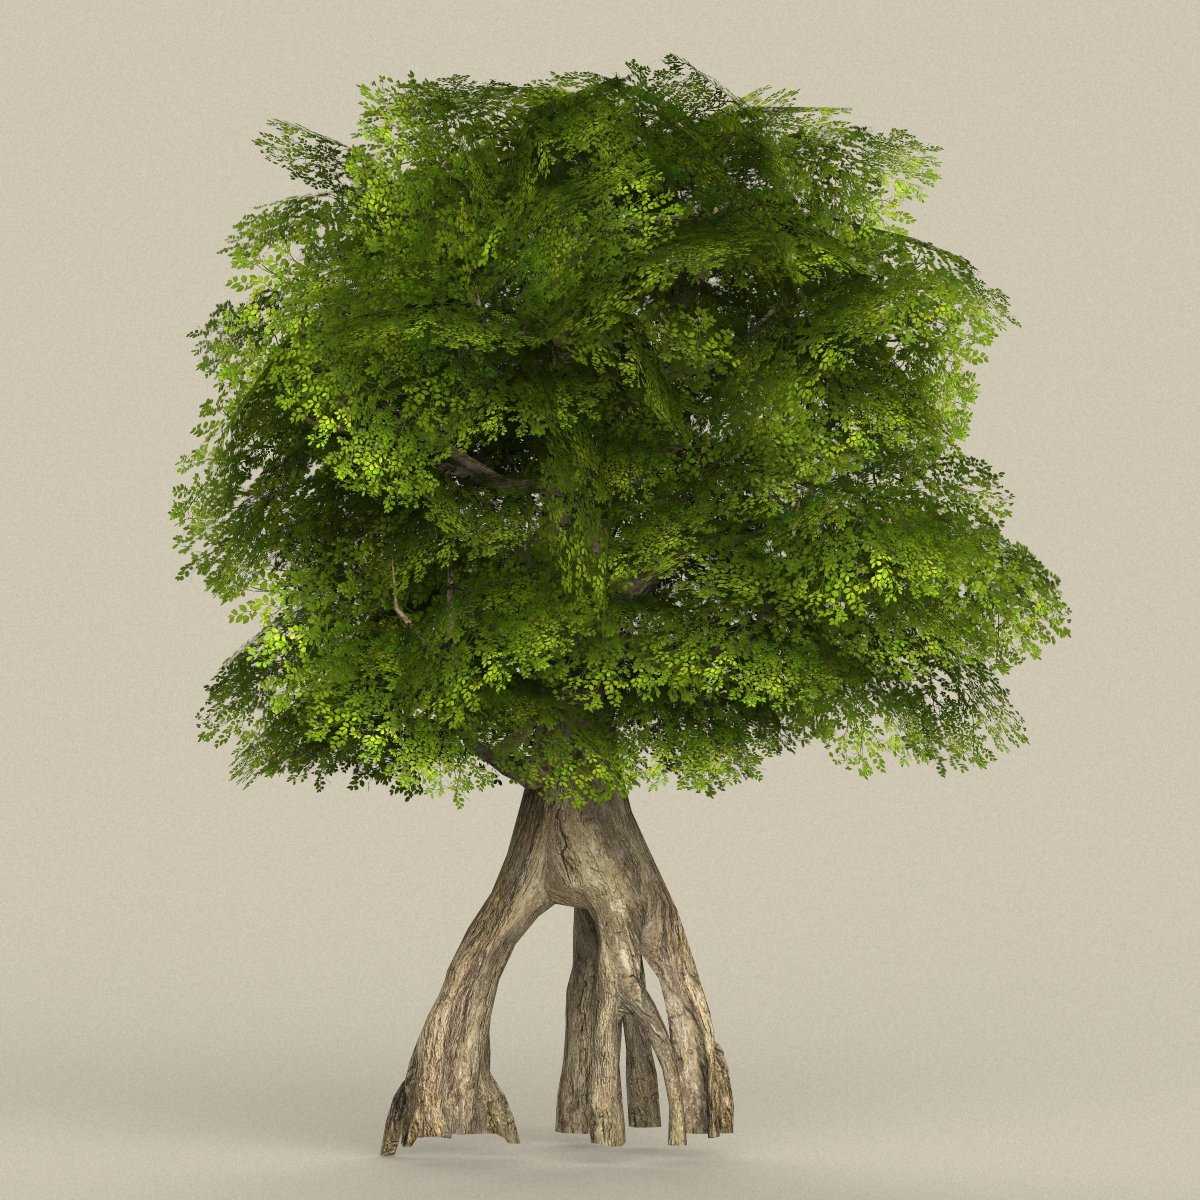 Sketchup plants, trees, and shrubs archive
sketchup plants, trees, and shrubs archive